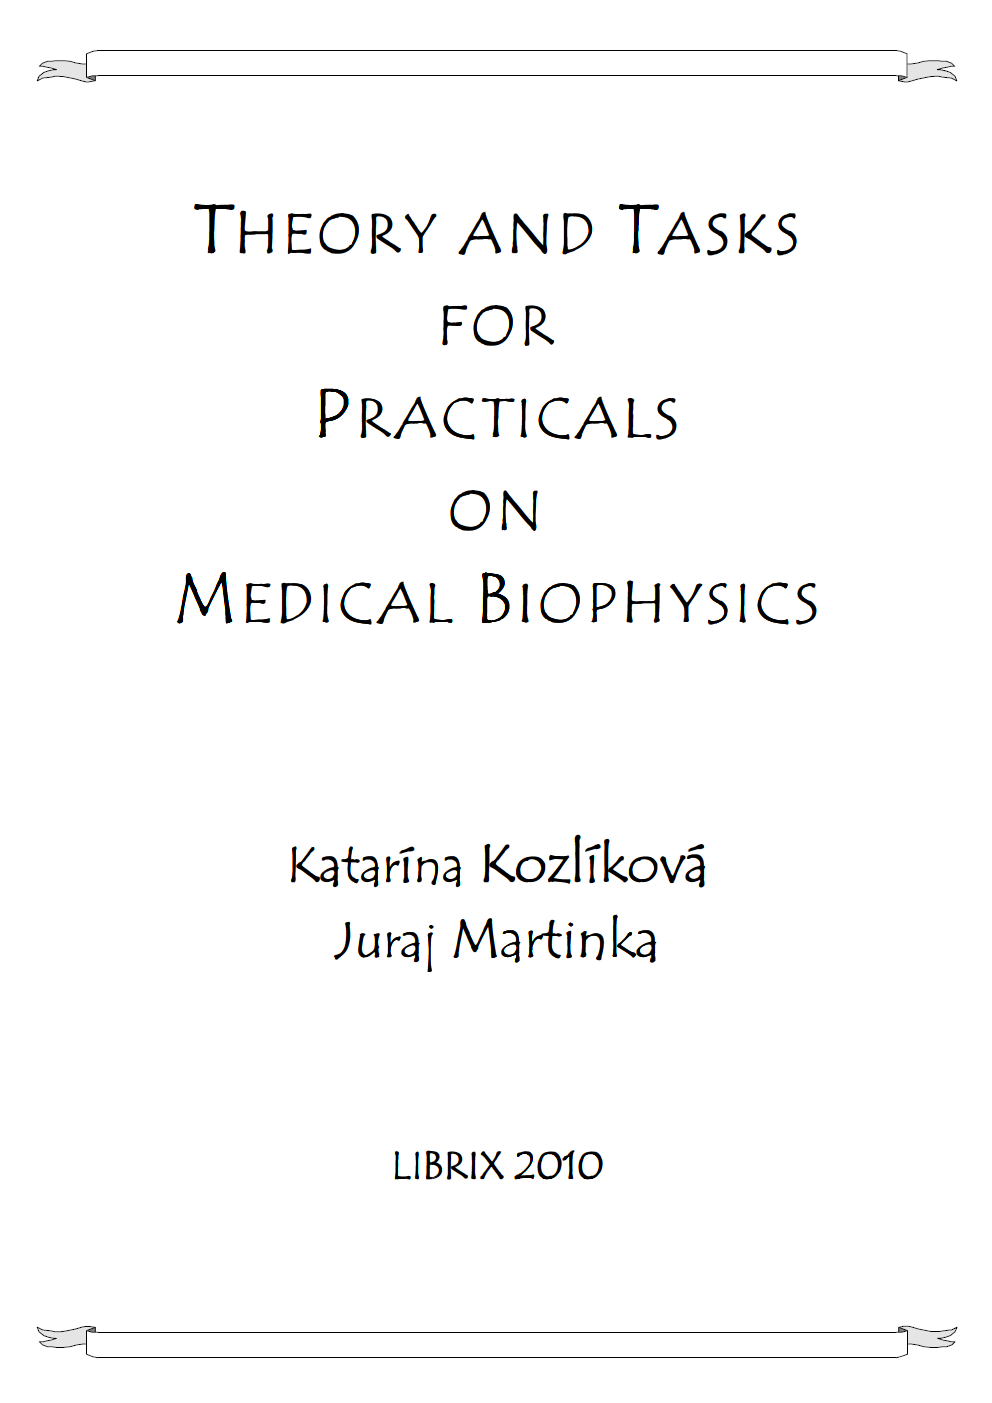 Theory and Tasks for Practicals on Medical Biophysics